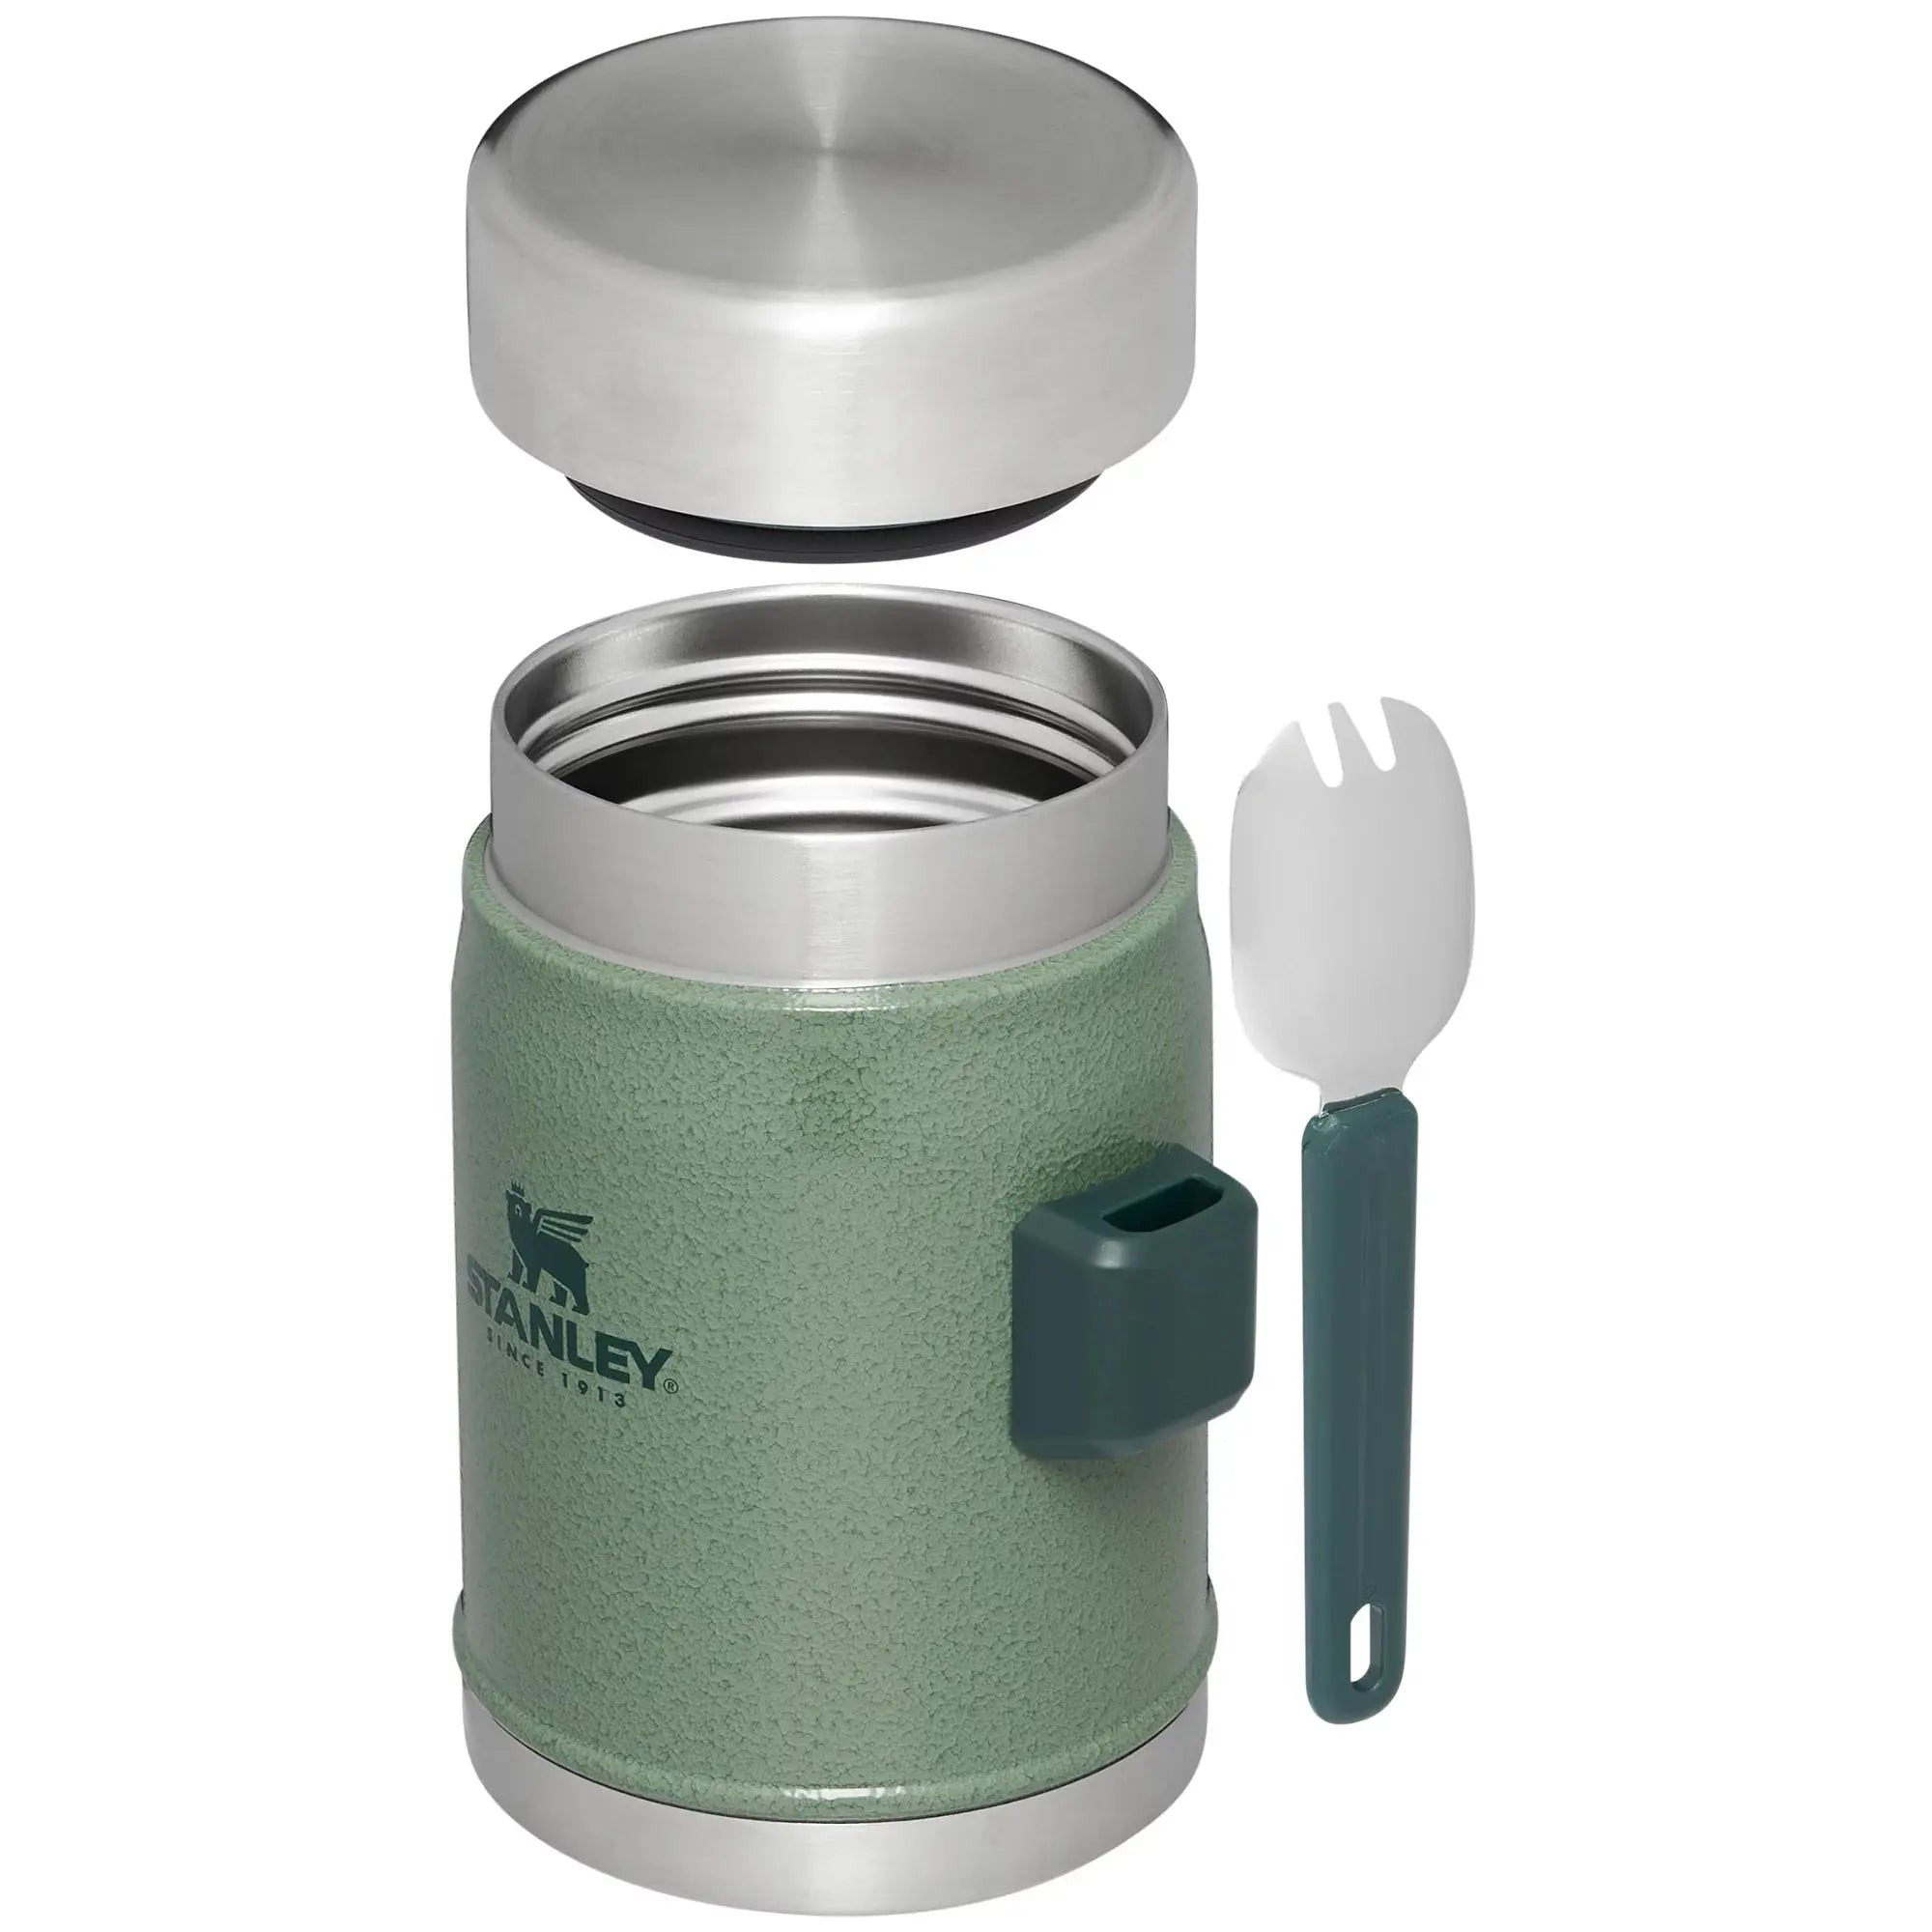 Stanley Classic 14 oz. Heritage Insulated Food Jar with Spork Stanley